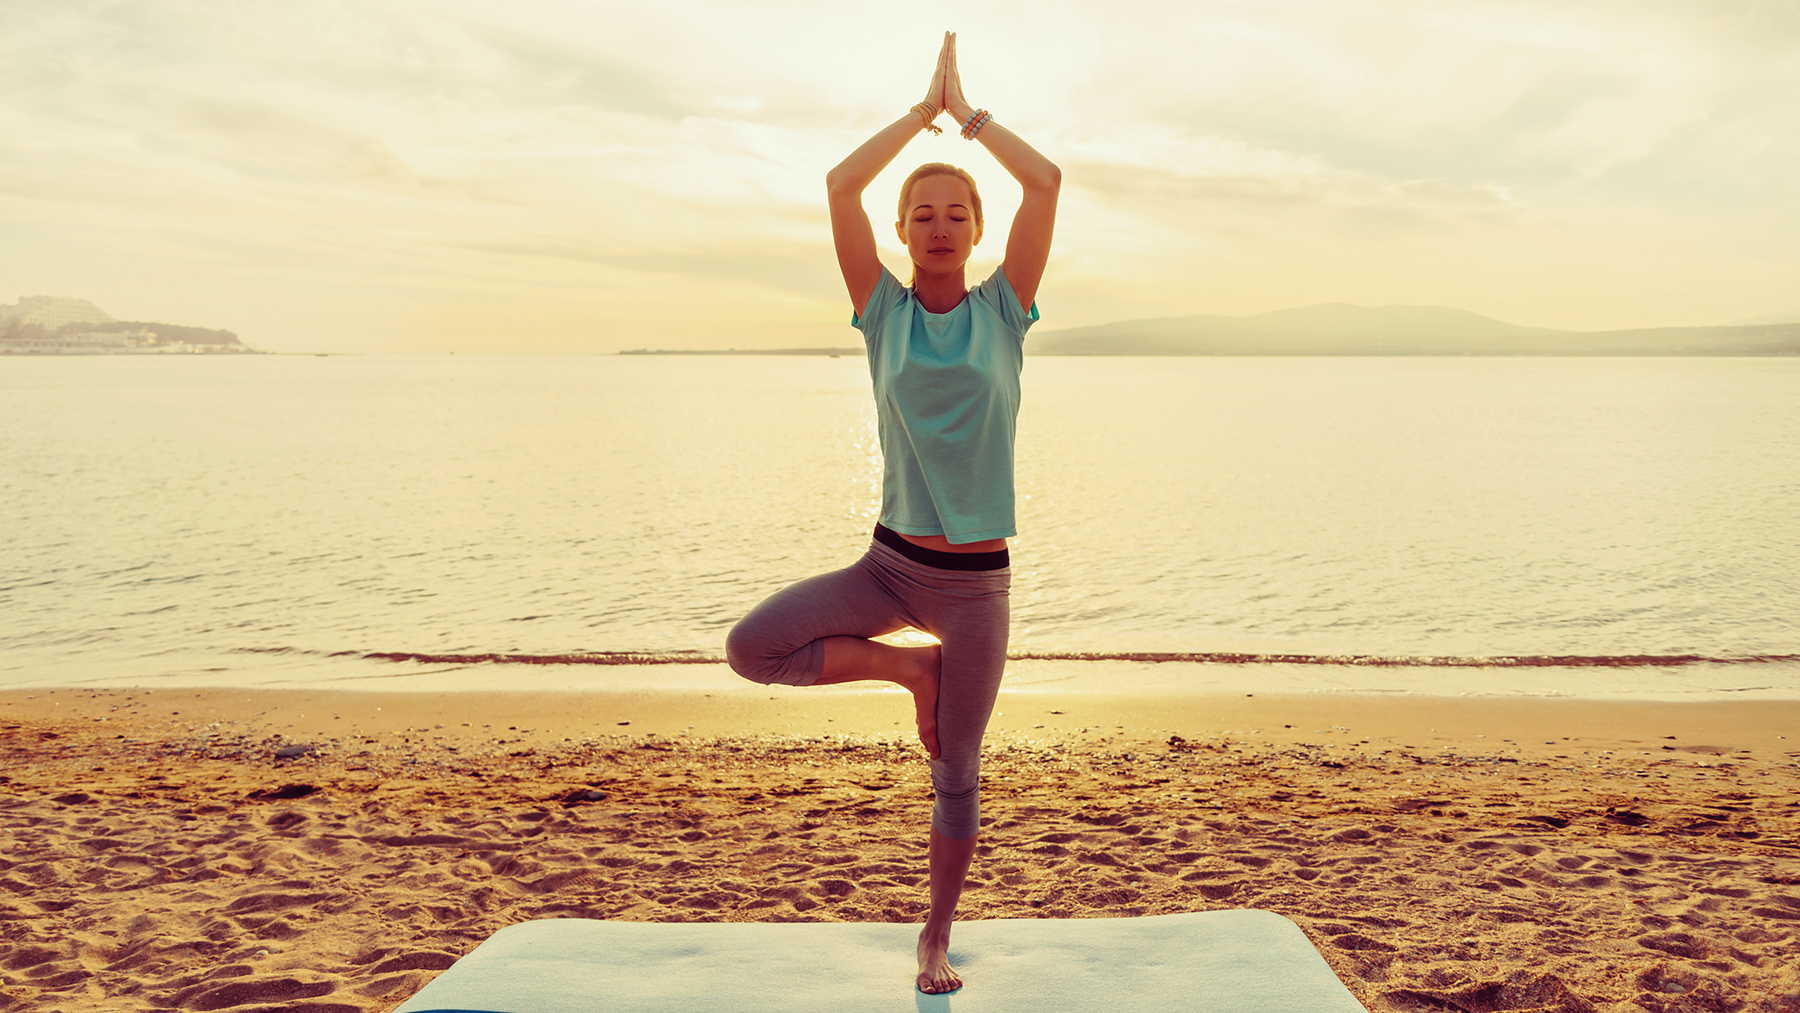 The yoga tree pose can help balance your mind and increase concentration.